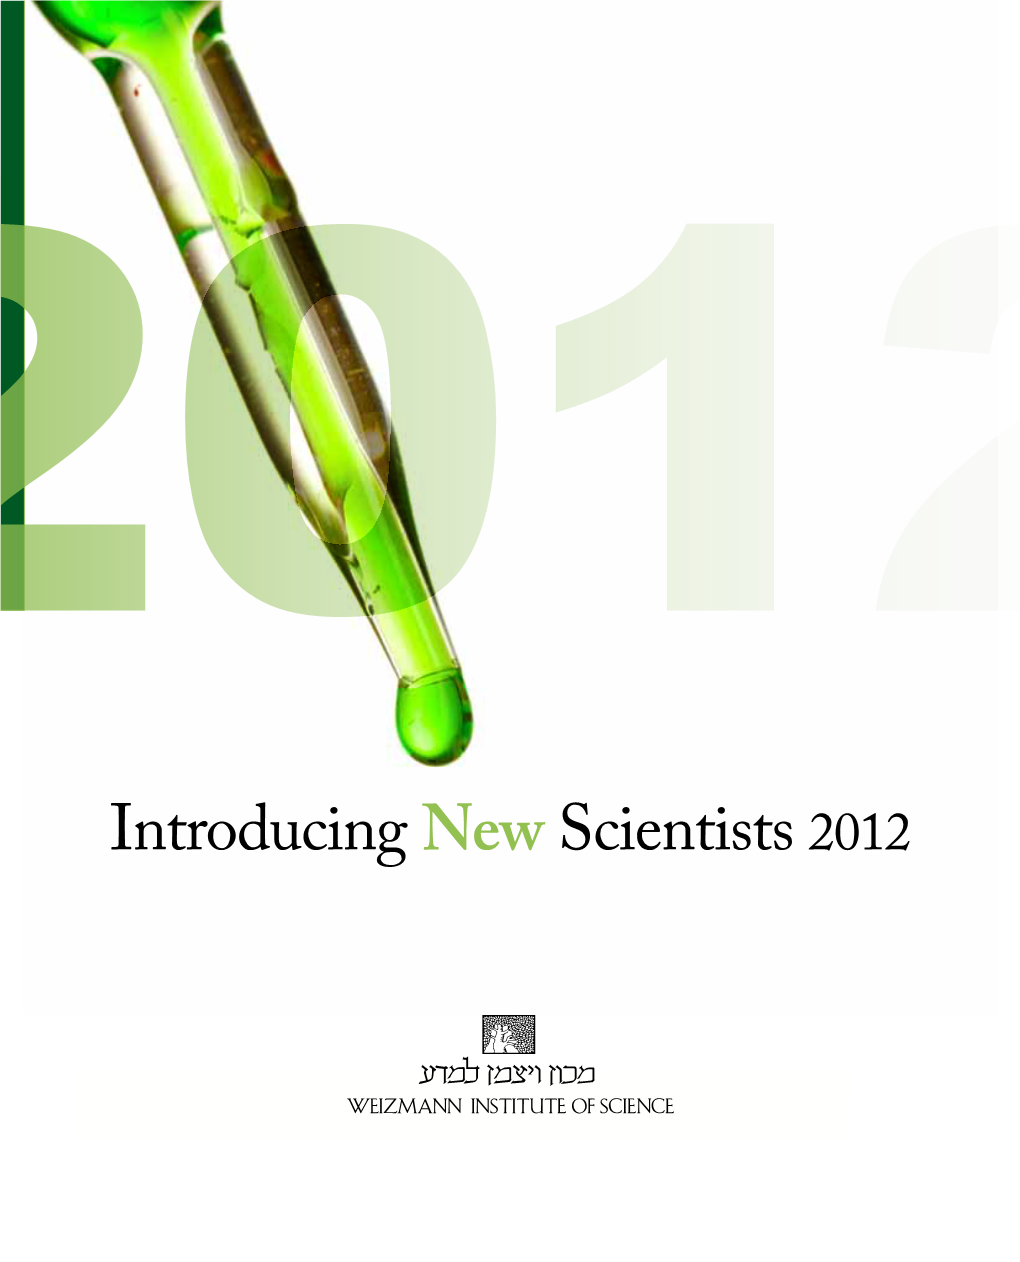 Introducing New Scientists 2012 Introducing New Scientists 2012 Is Published by the Department of Resource Development at the Weizmann Institute of Science P.O